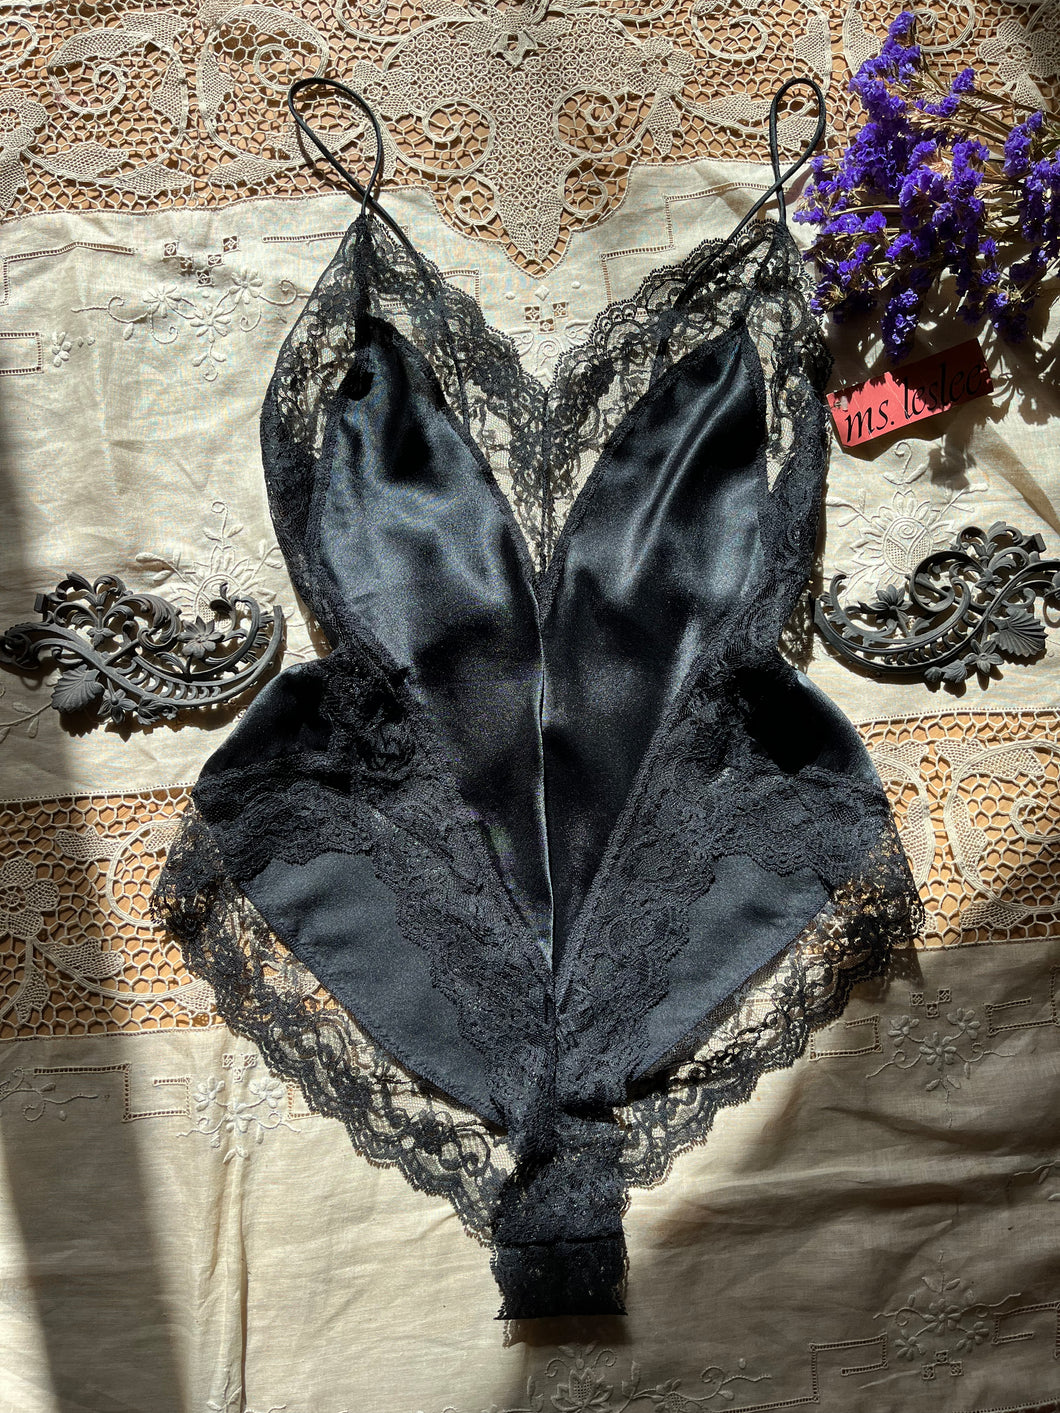 Deadstock 1980’s vintage Black Satin and Lace teddy by Ms Leslee